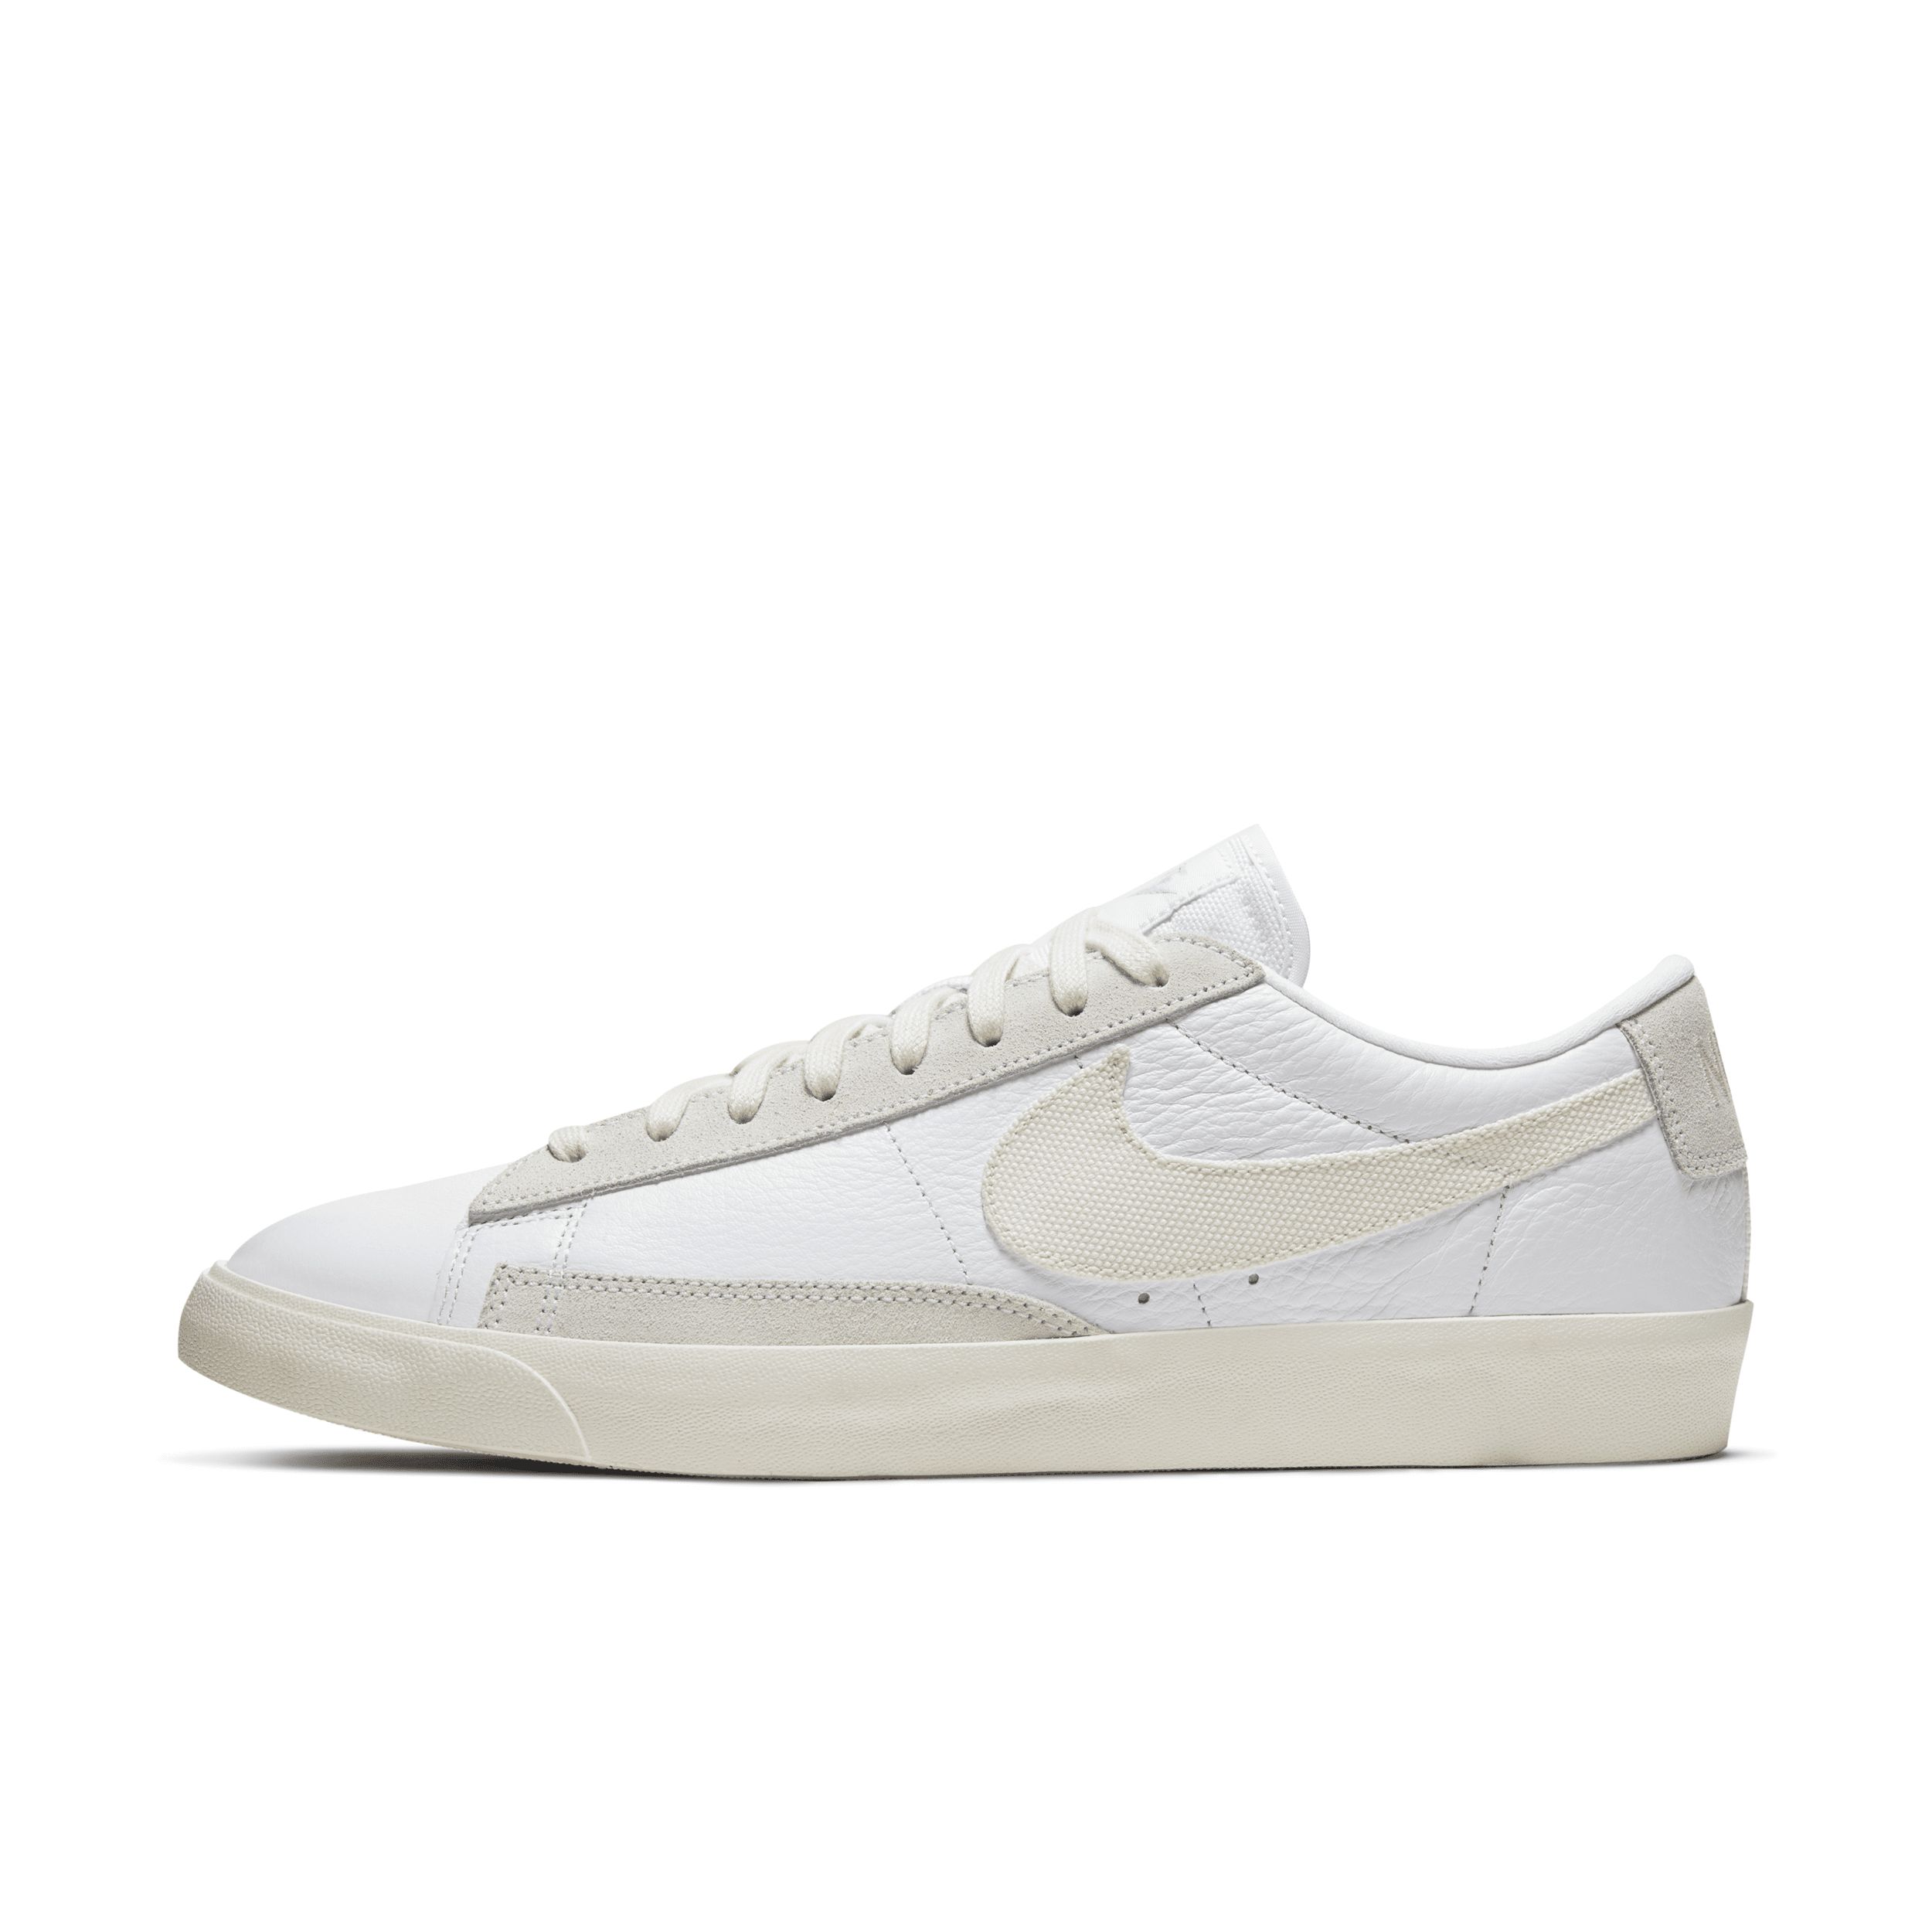 Nike Men's Blazer Low Leather Shoes in White, Size: 7.5 | CW7585-100 | Nike (US)